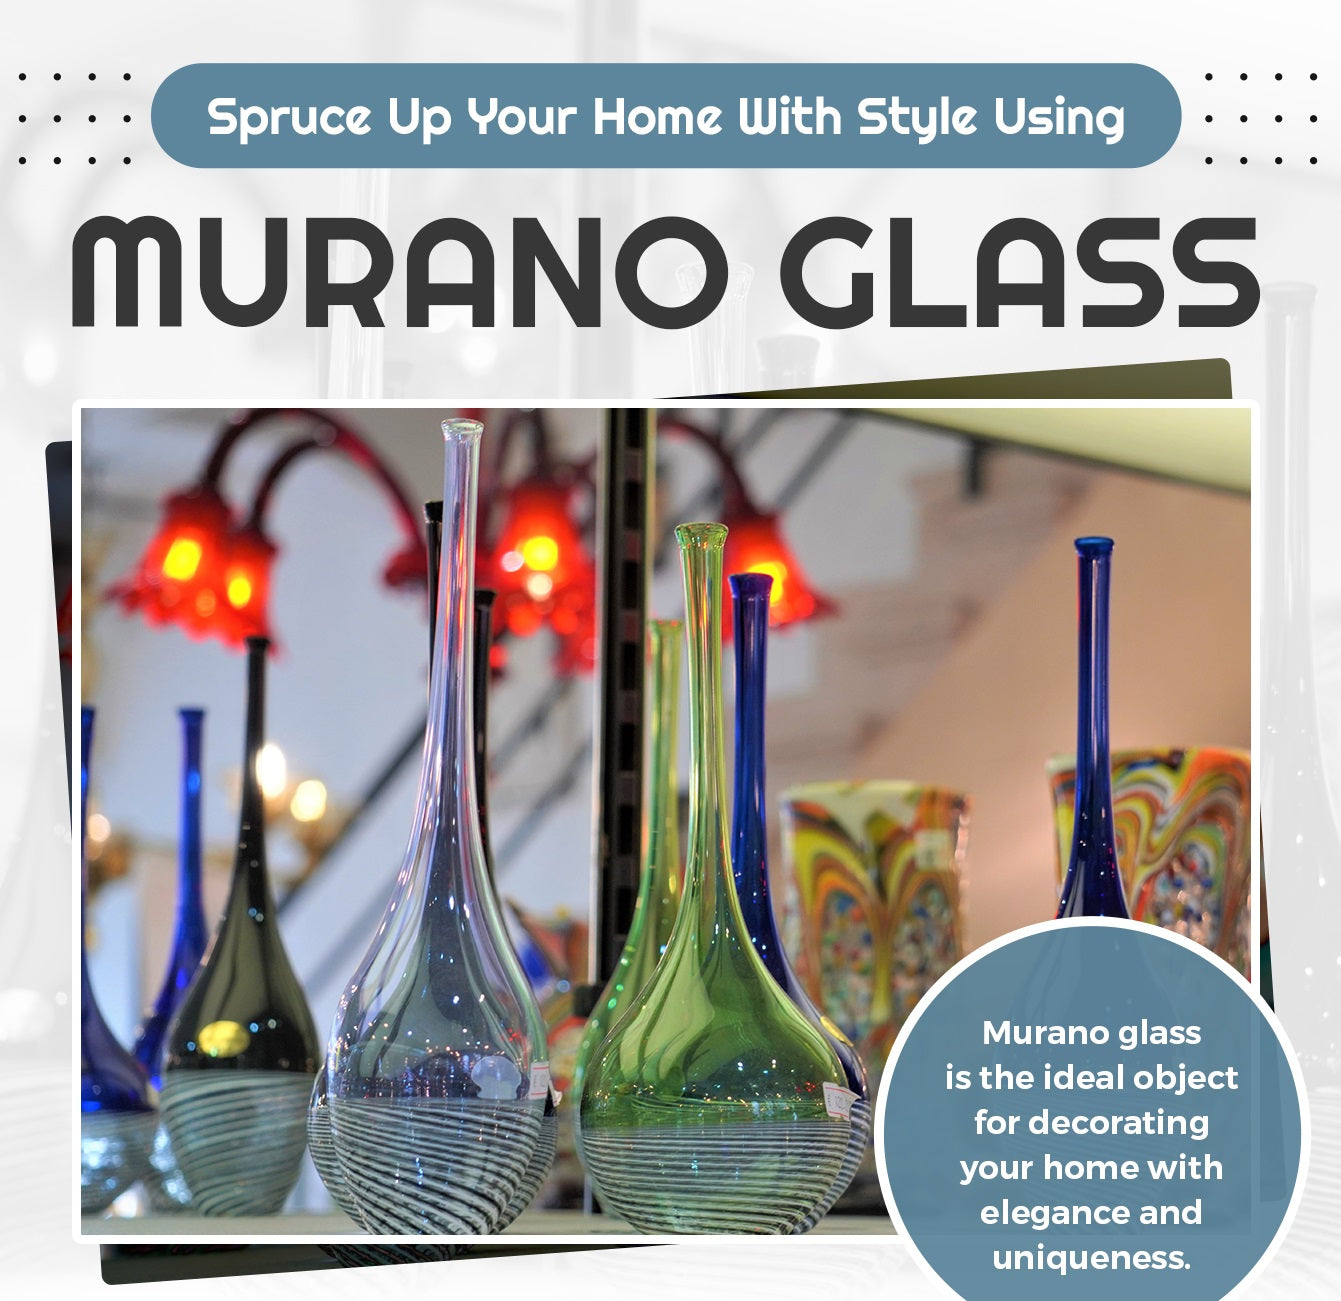 Spruce Up Your Home With Style Using Murano Glass